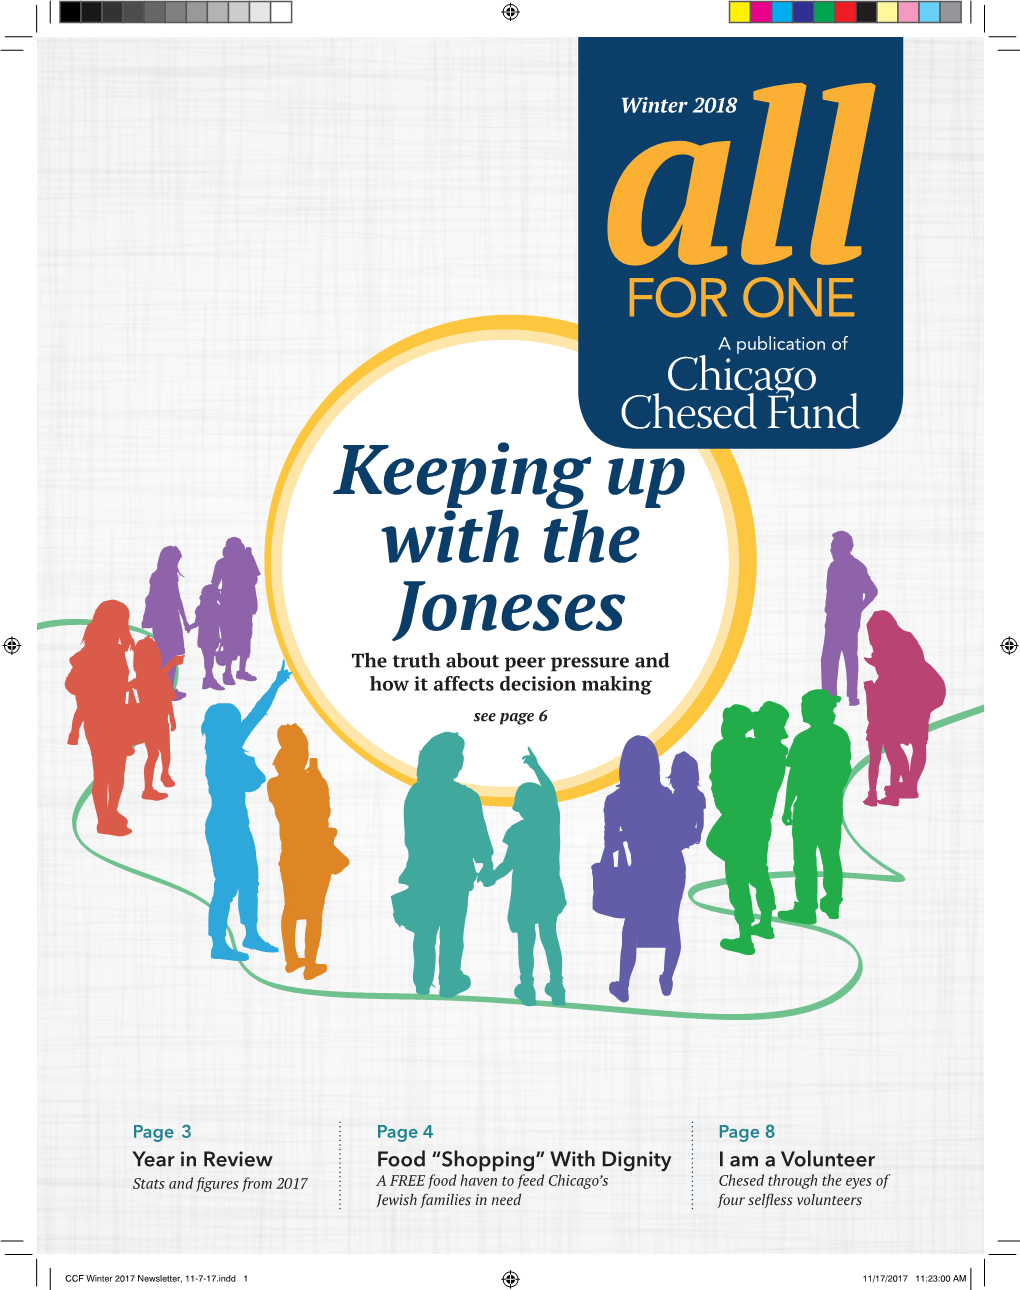 Keeping up with the Joneses the Truth About Peer Pressure and How It Affects Decision Making See Page 6